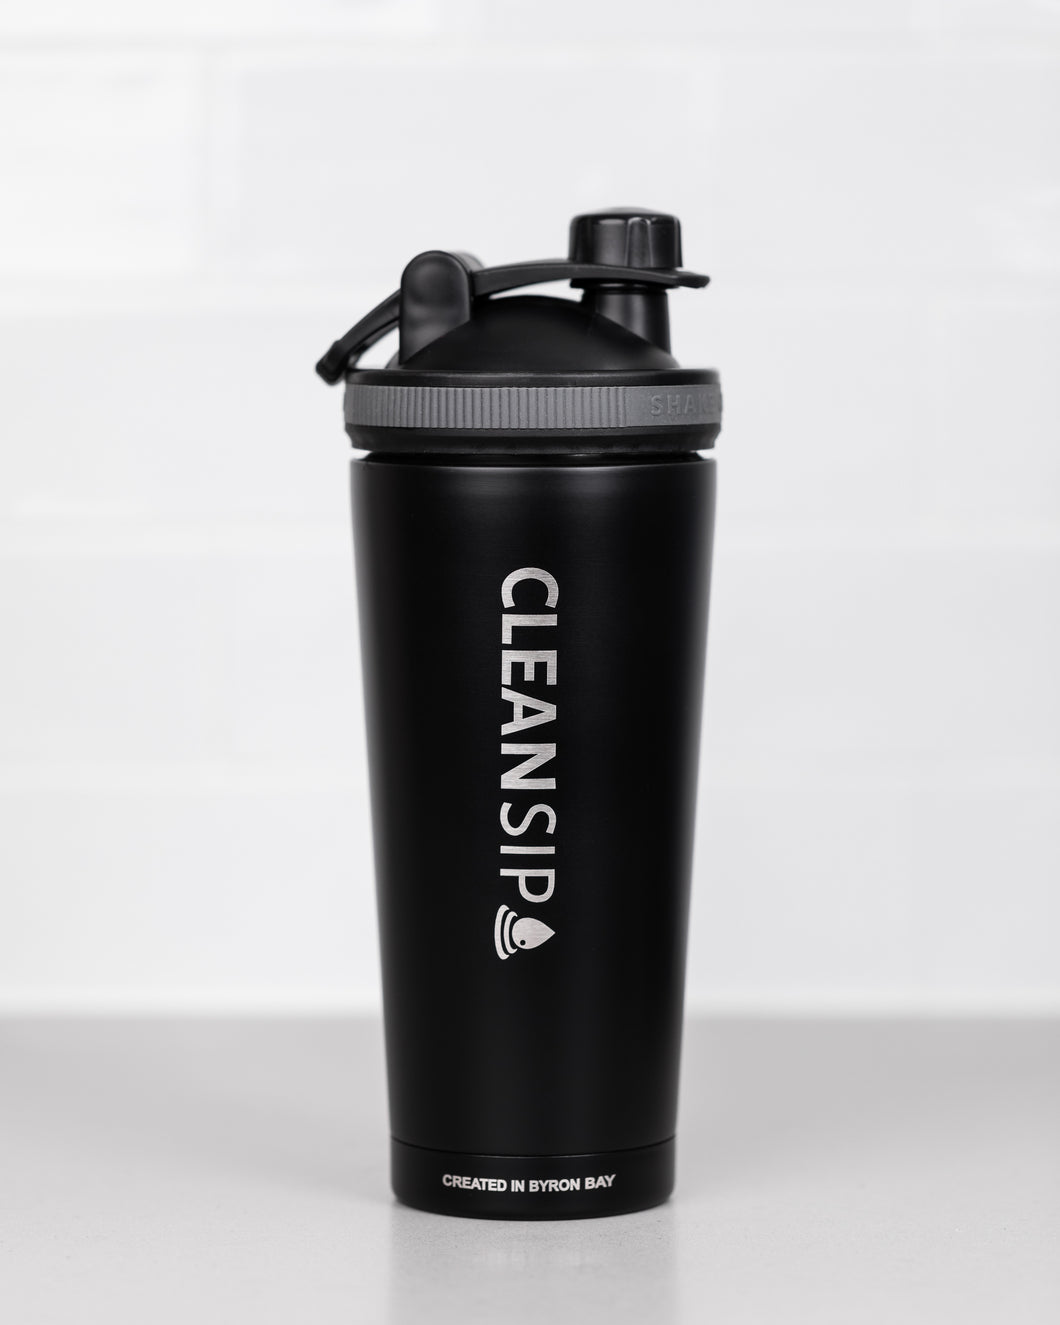 Sip Shaker - Black - SOLD OUT